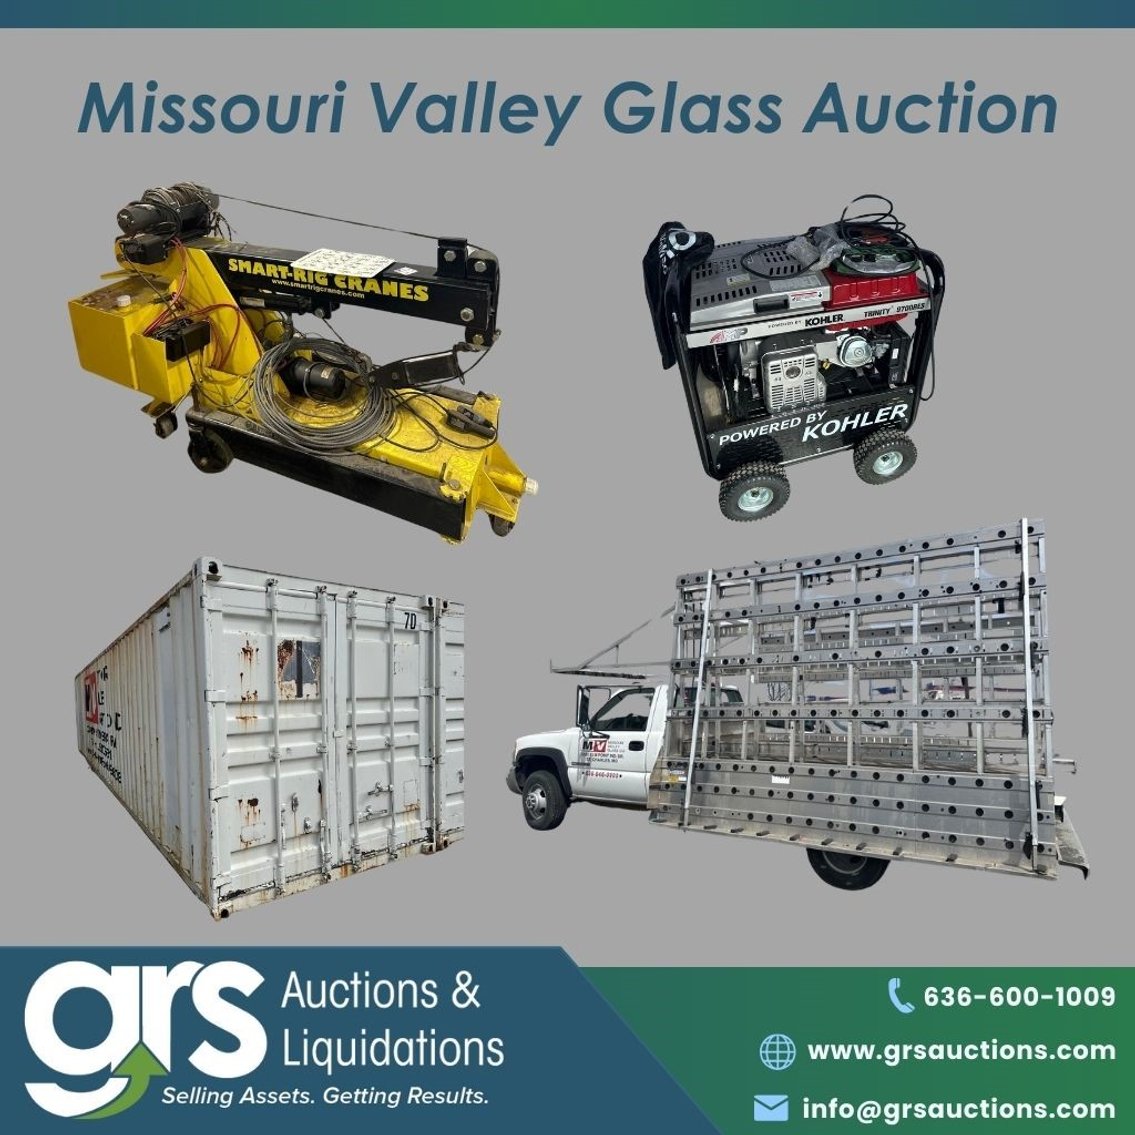 Missouri Valley Glass #1Shop, Containers & Trucks